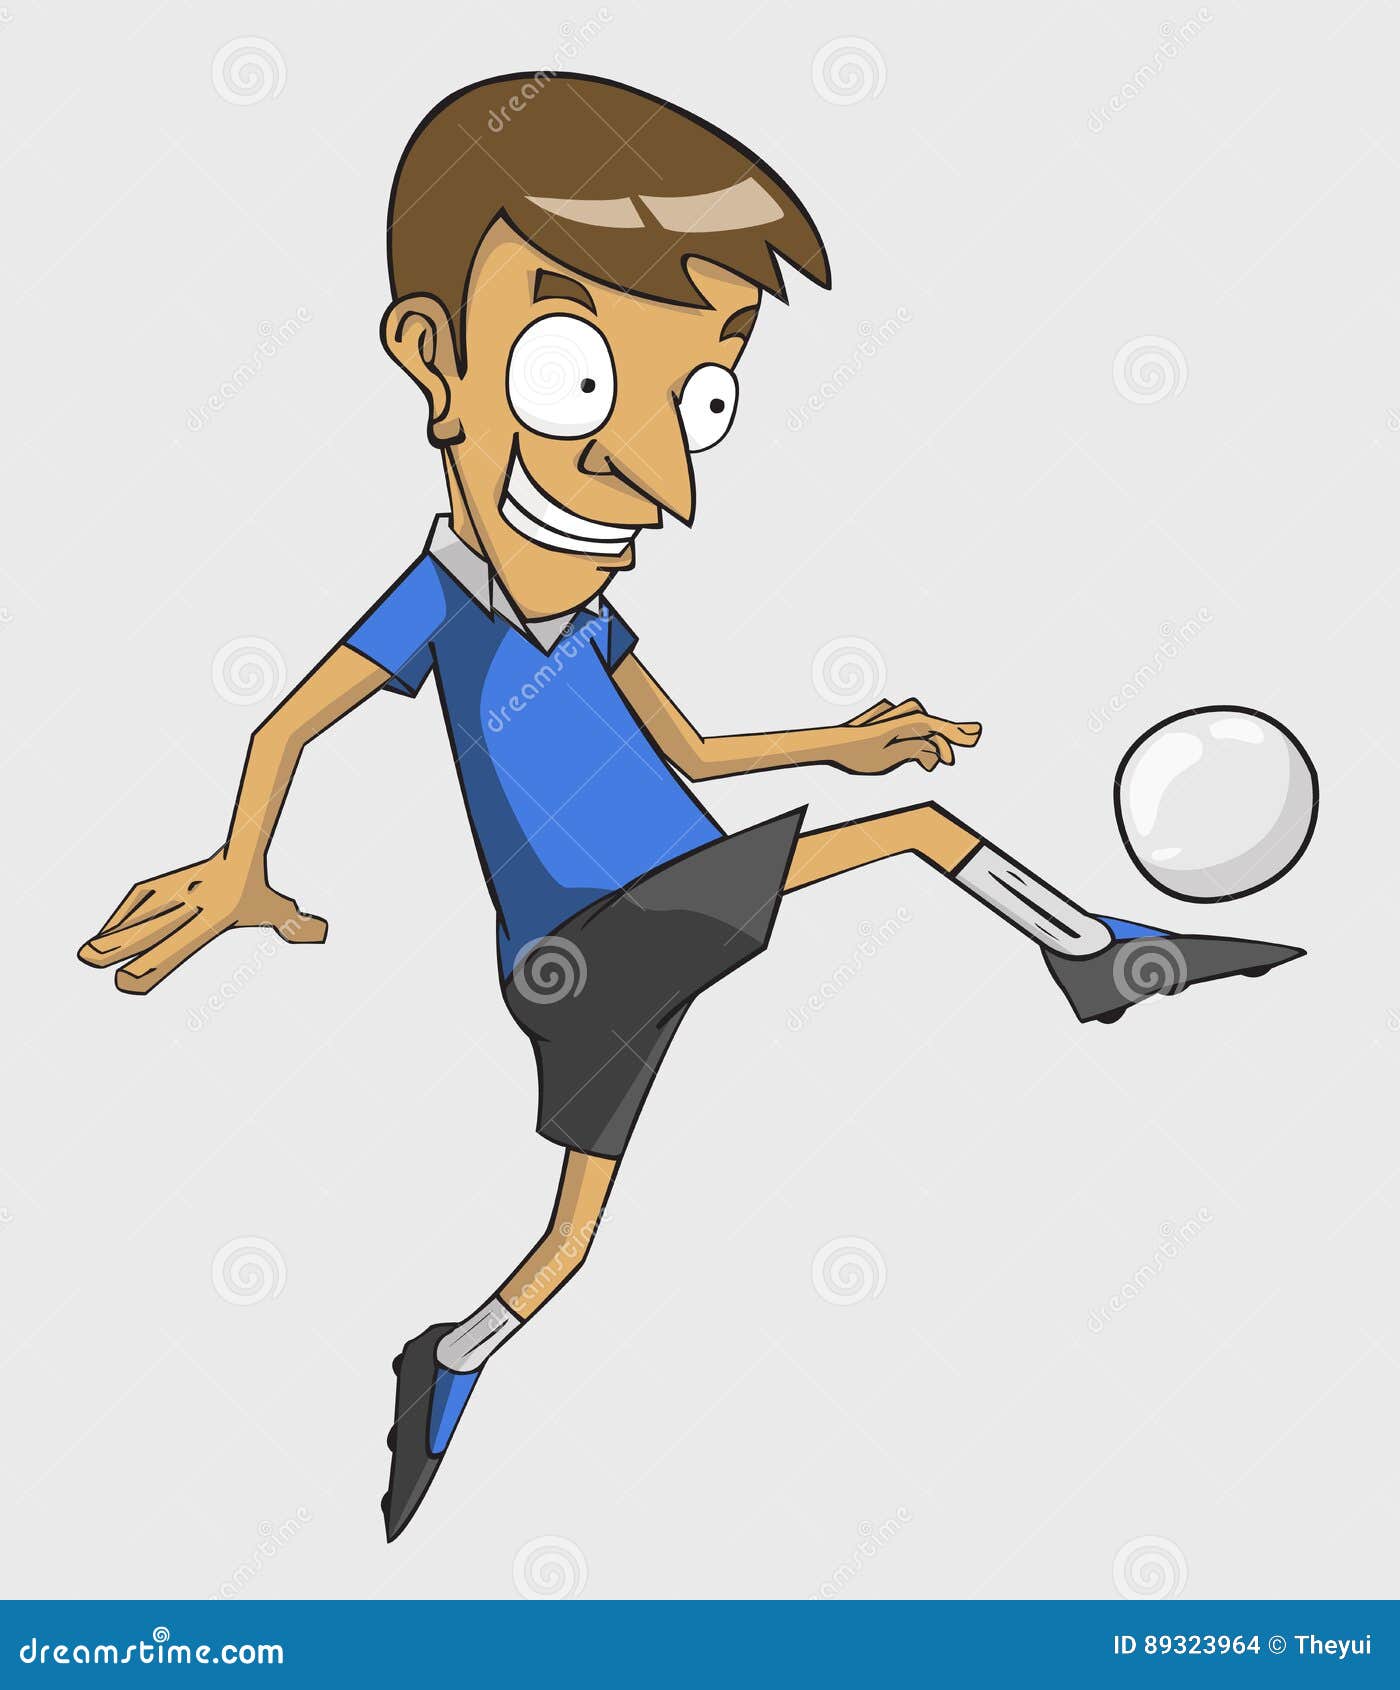 Soccer Player Action Kick the Ball Stock Vector - Illustration of ...